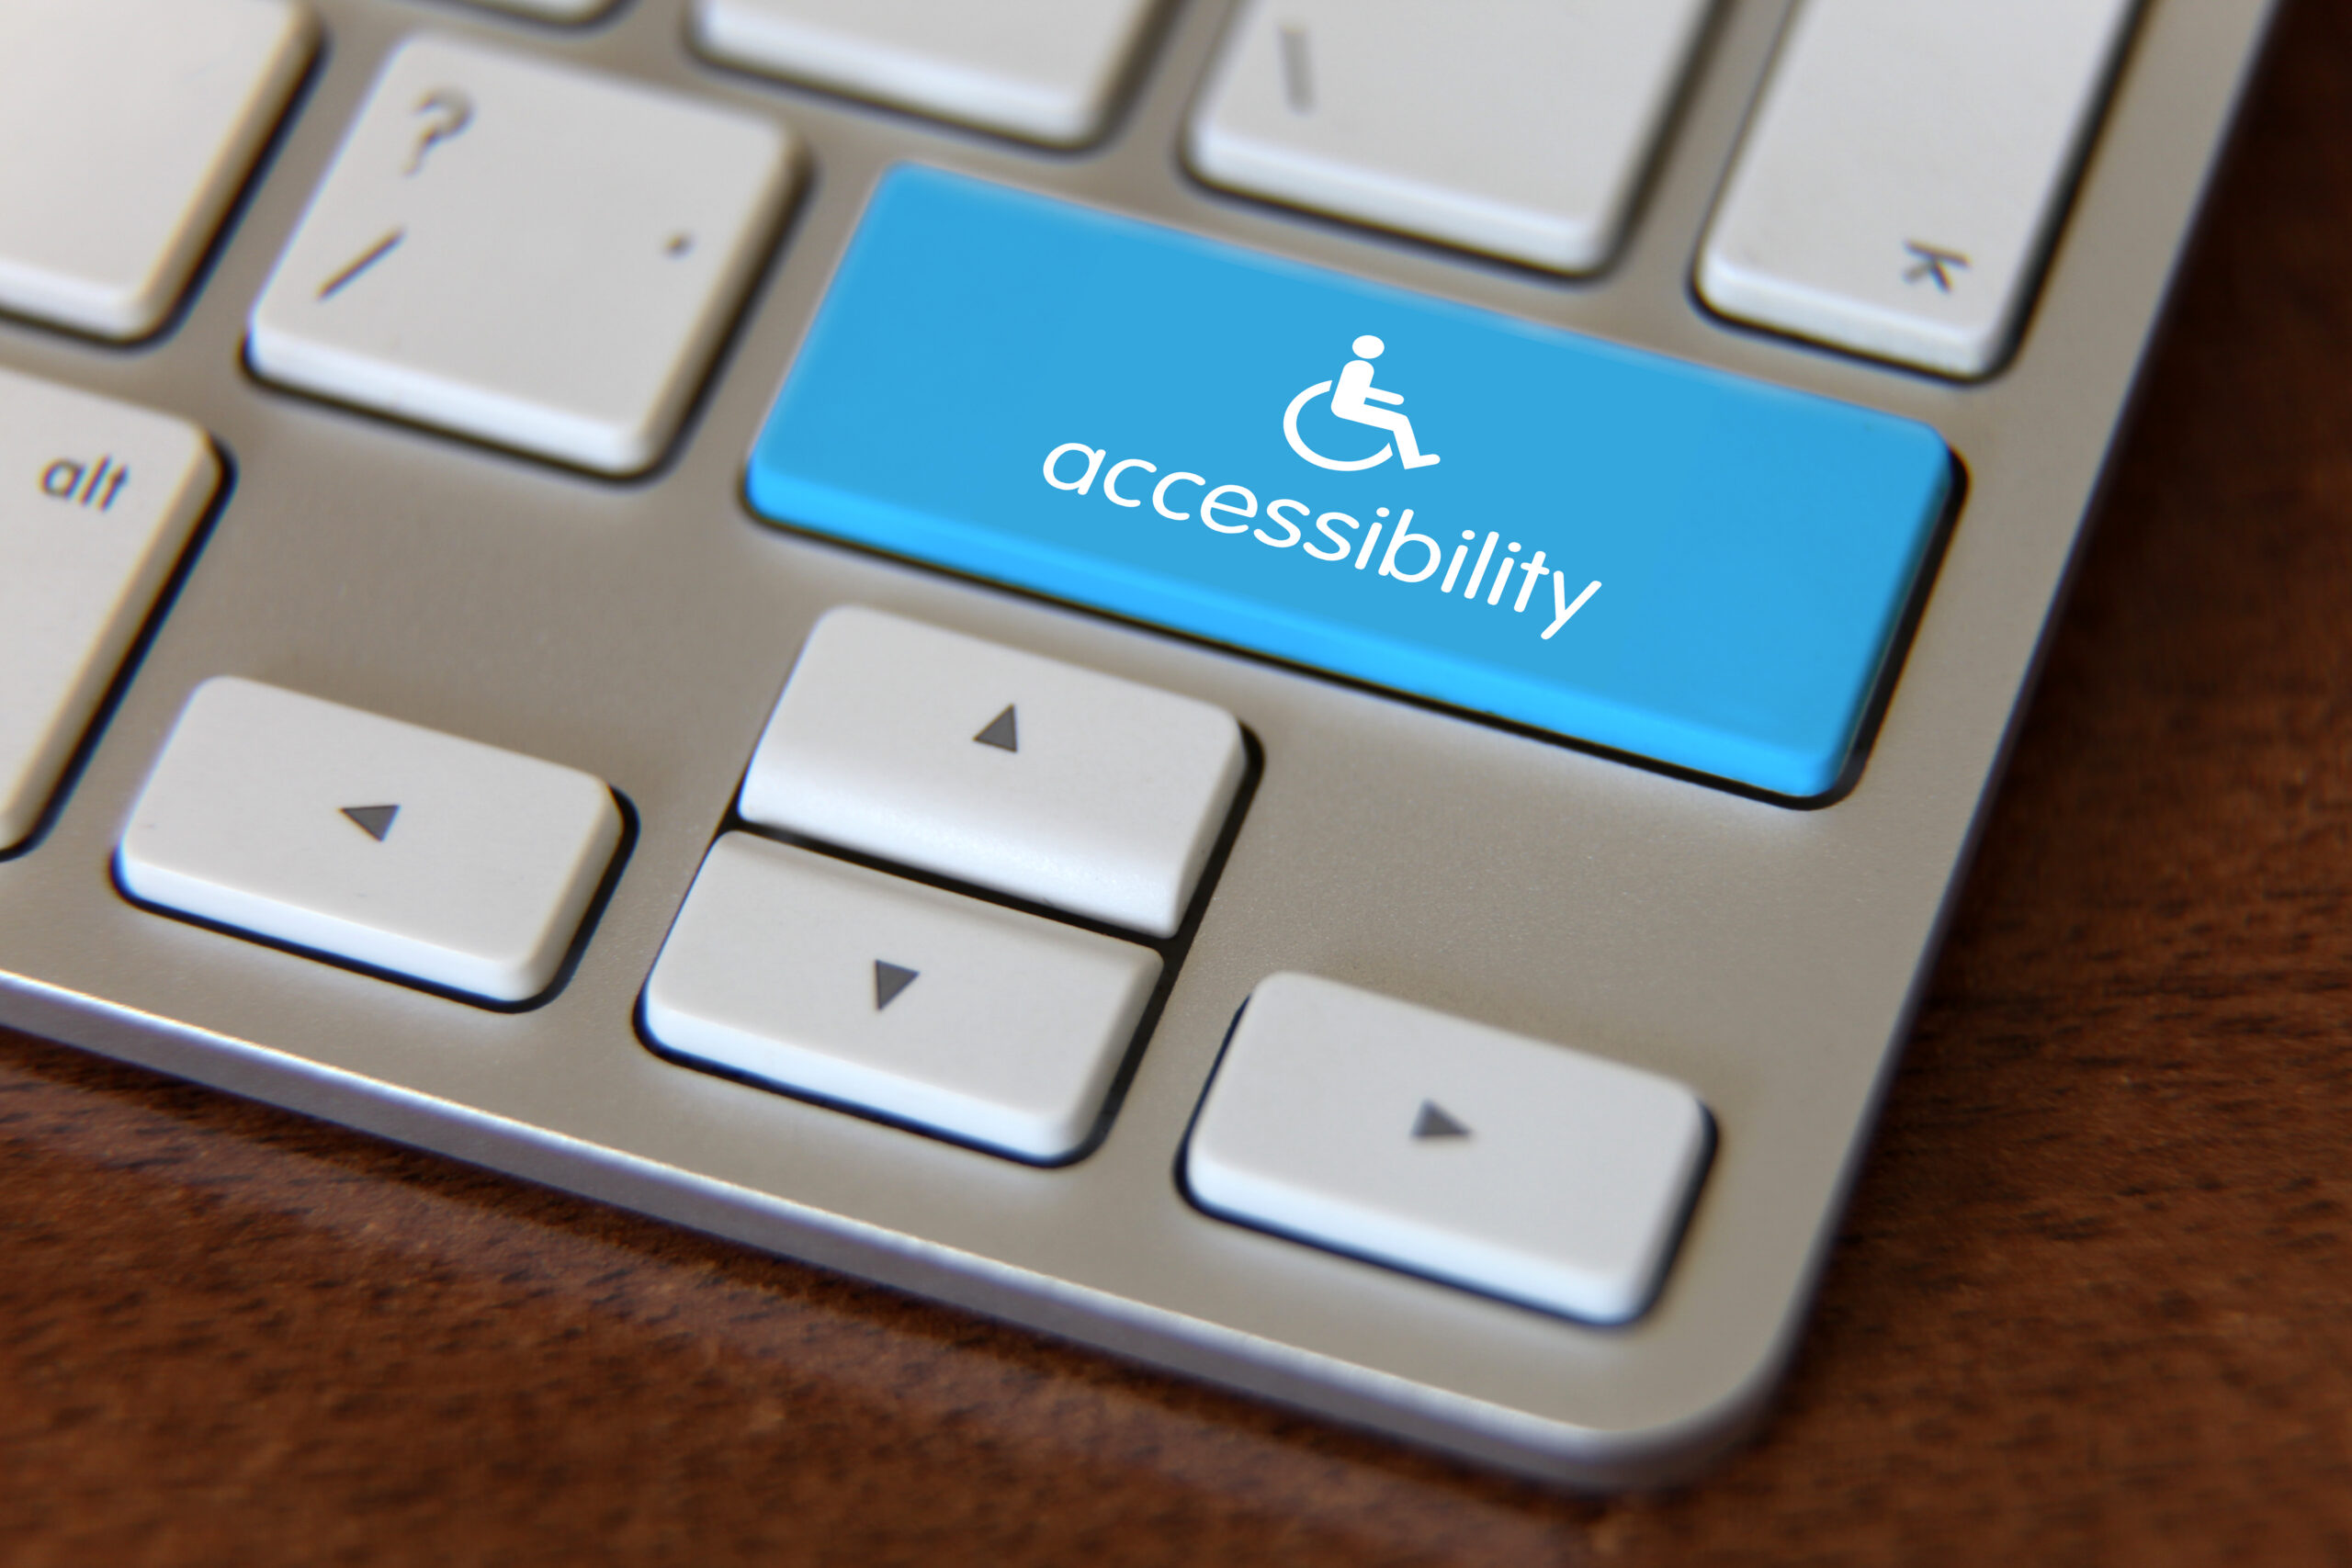 keyboard showing a blue accessibility key to symbolize website accessibility